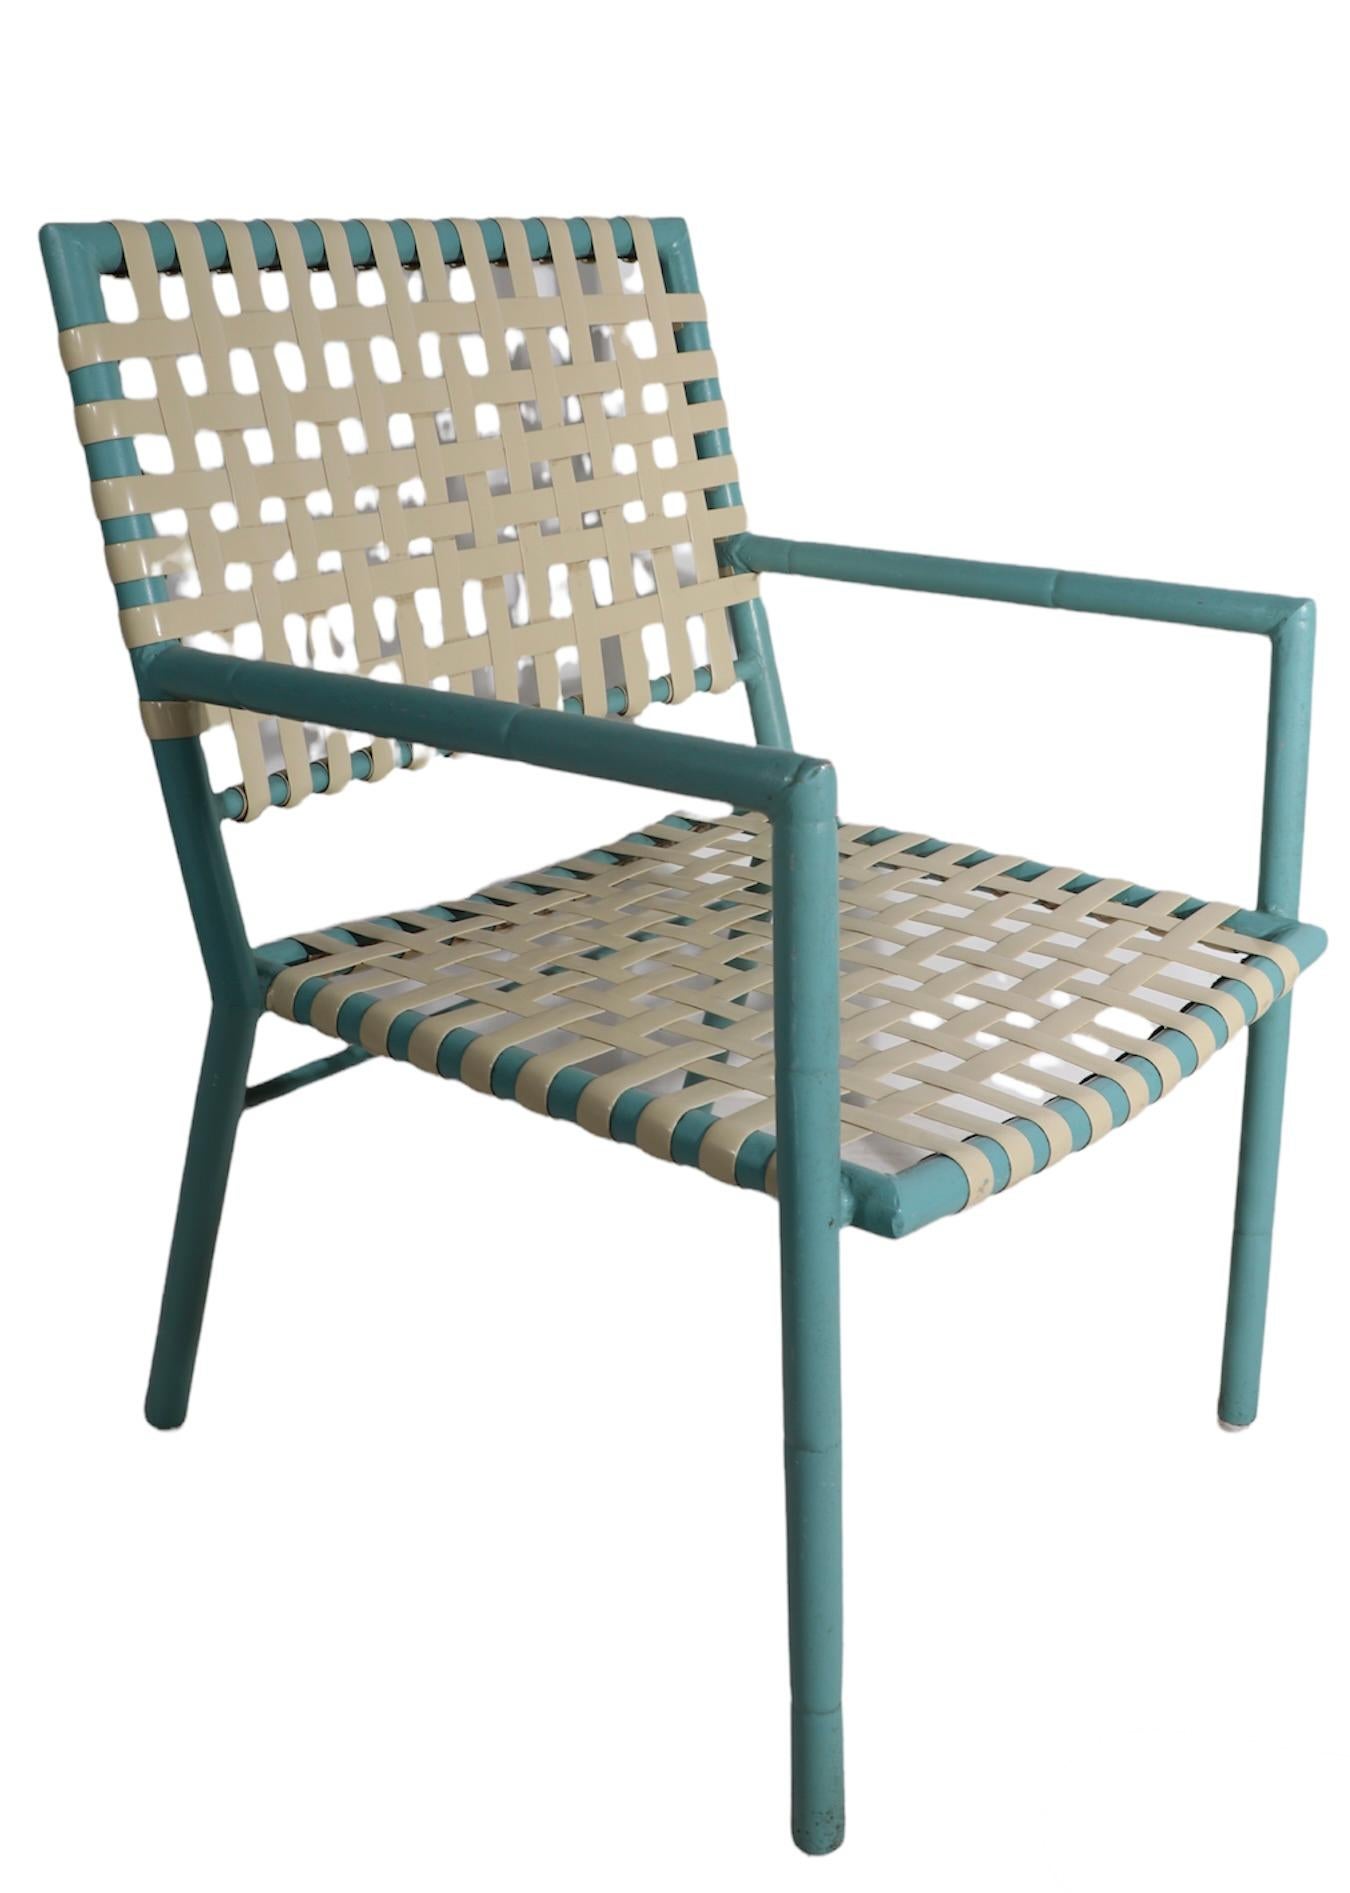 Aluminum 4 Pc. Faux Bamboo Garden Patio Poolside Chairs by Hauser Made in USA Ca. 1970's For Sale